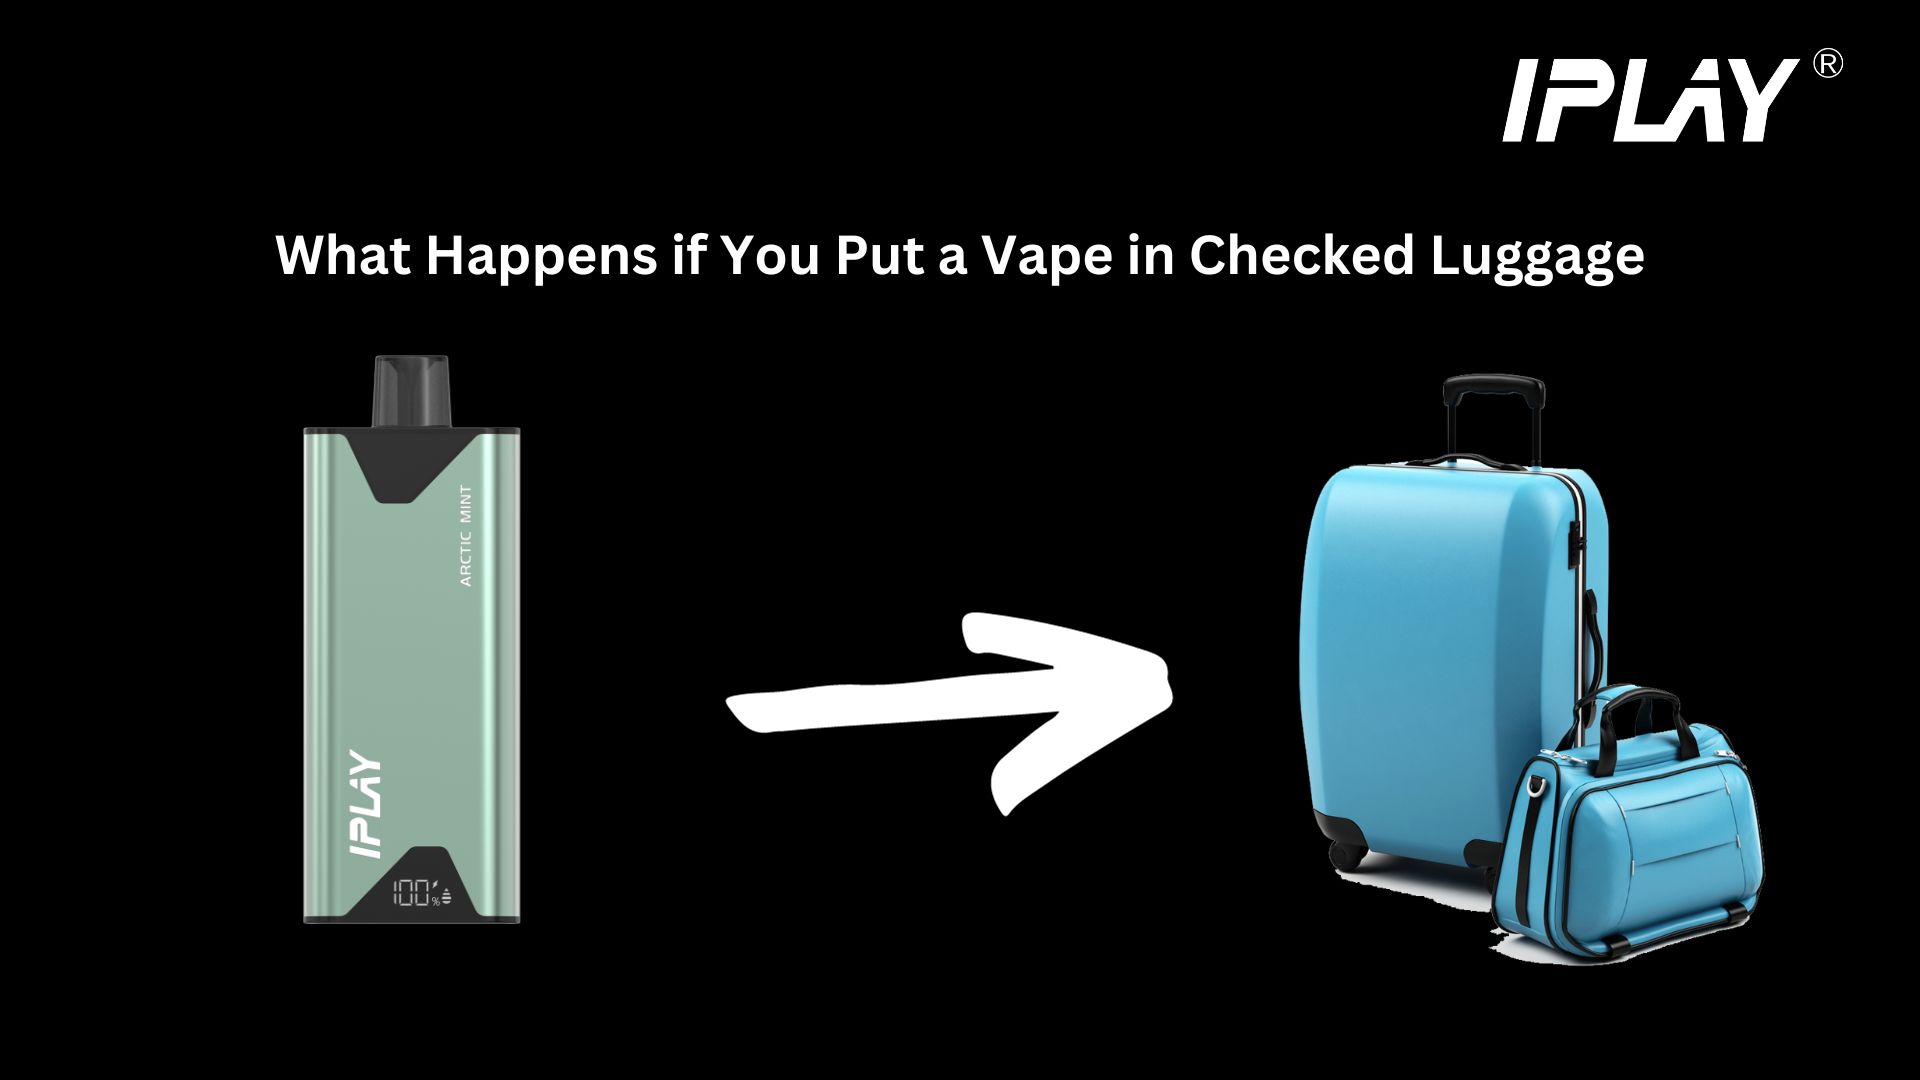 What Happens if You Put a Vape in Checked Luggage